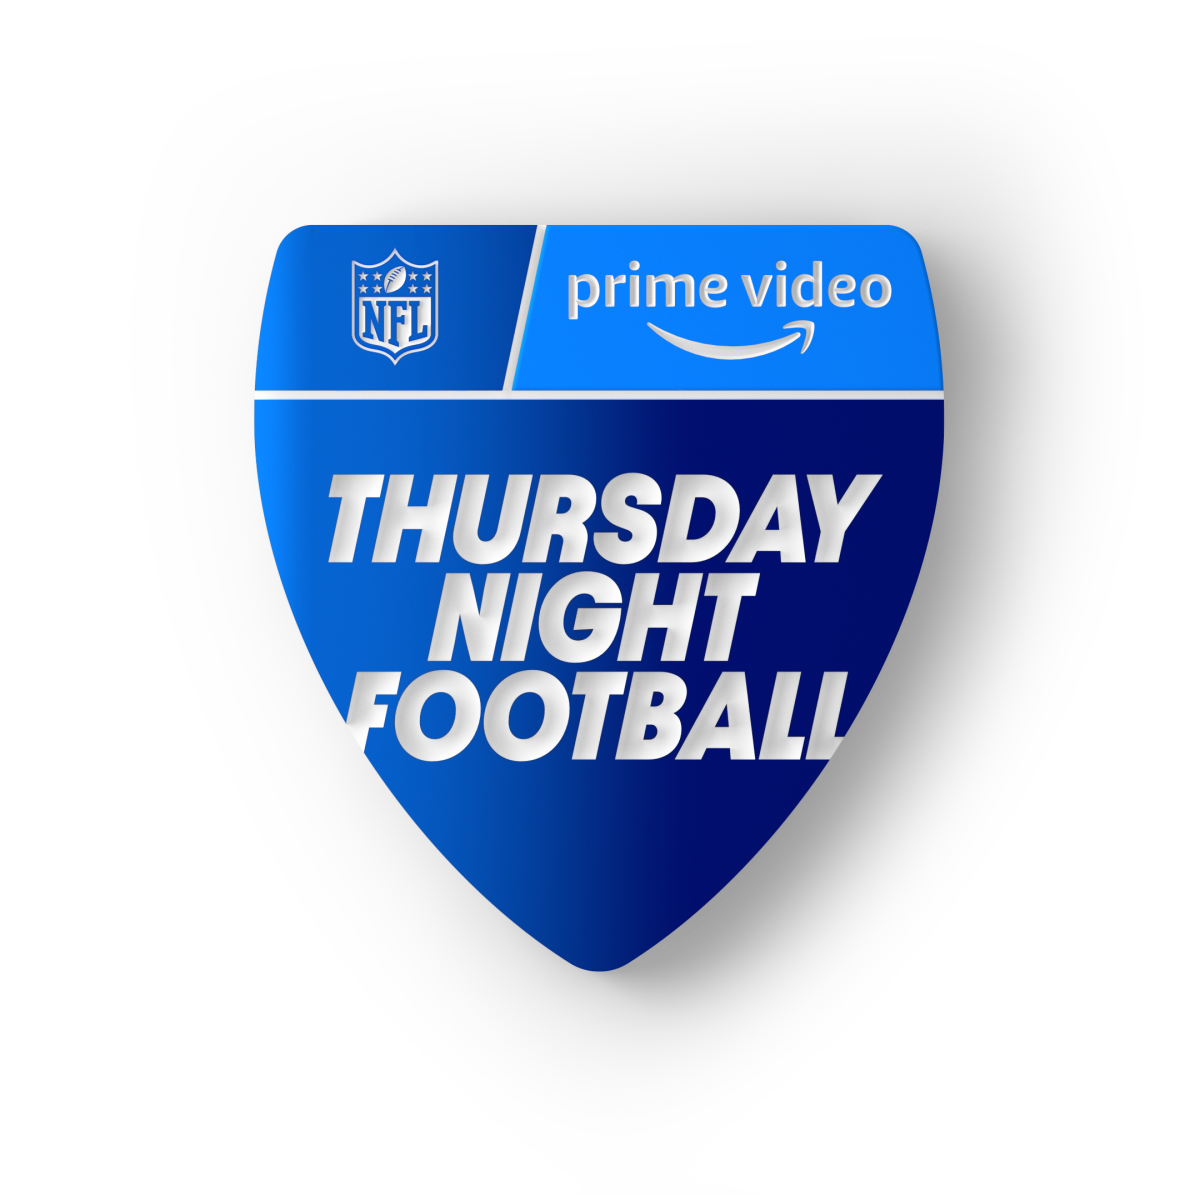 Amazon Takes to Super Bowl to Offer a Peek at ‘Thursday Night Football